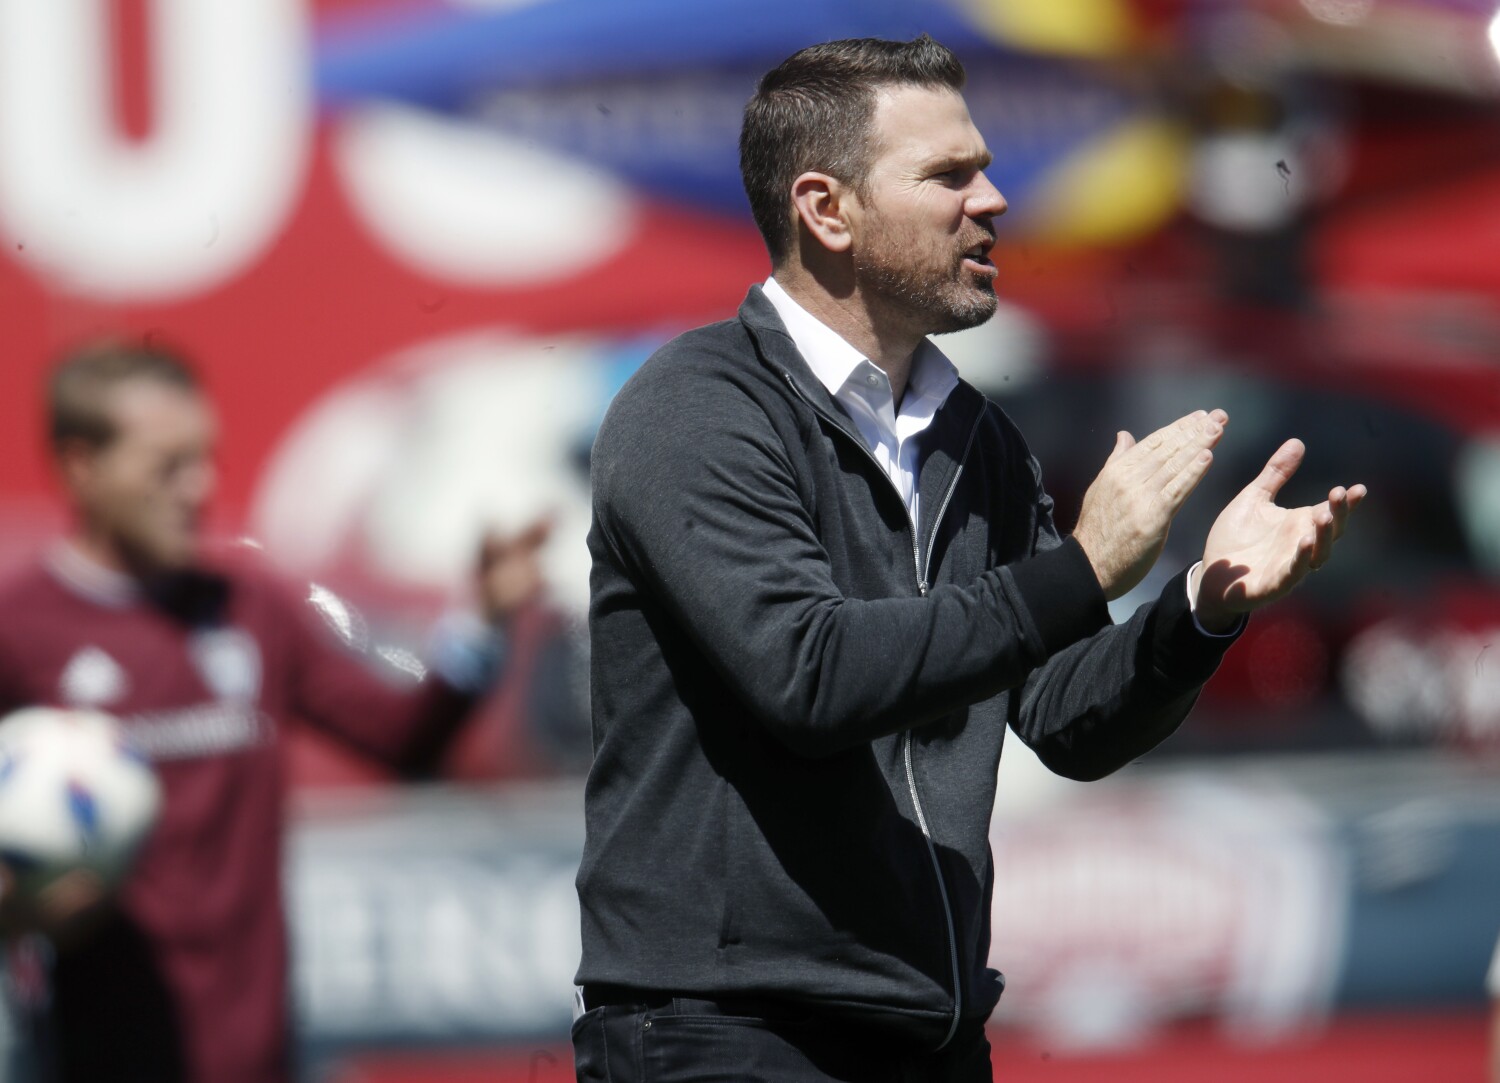 Galaxy hire Greg Vanney as next coach to lead rebuilding project